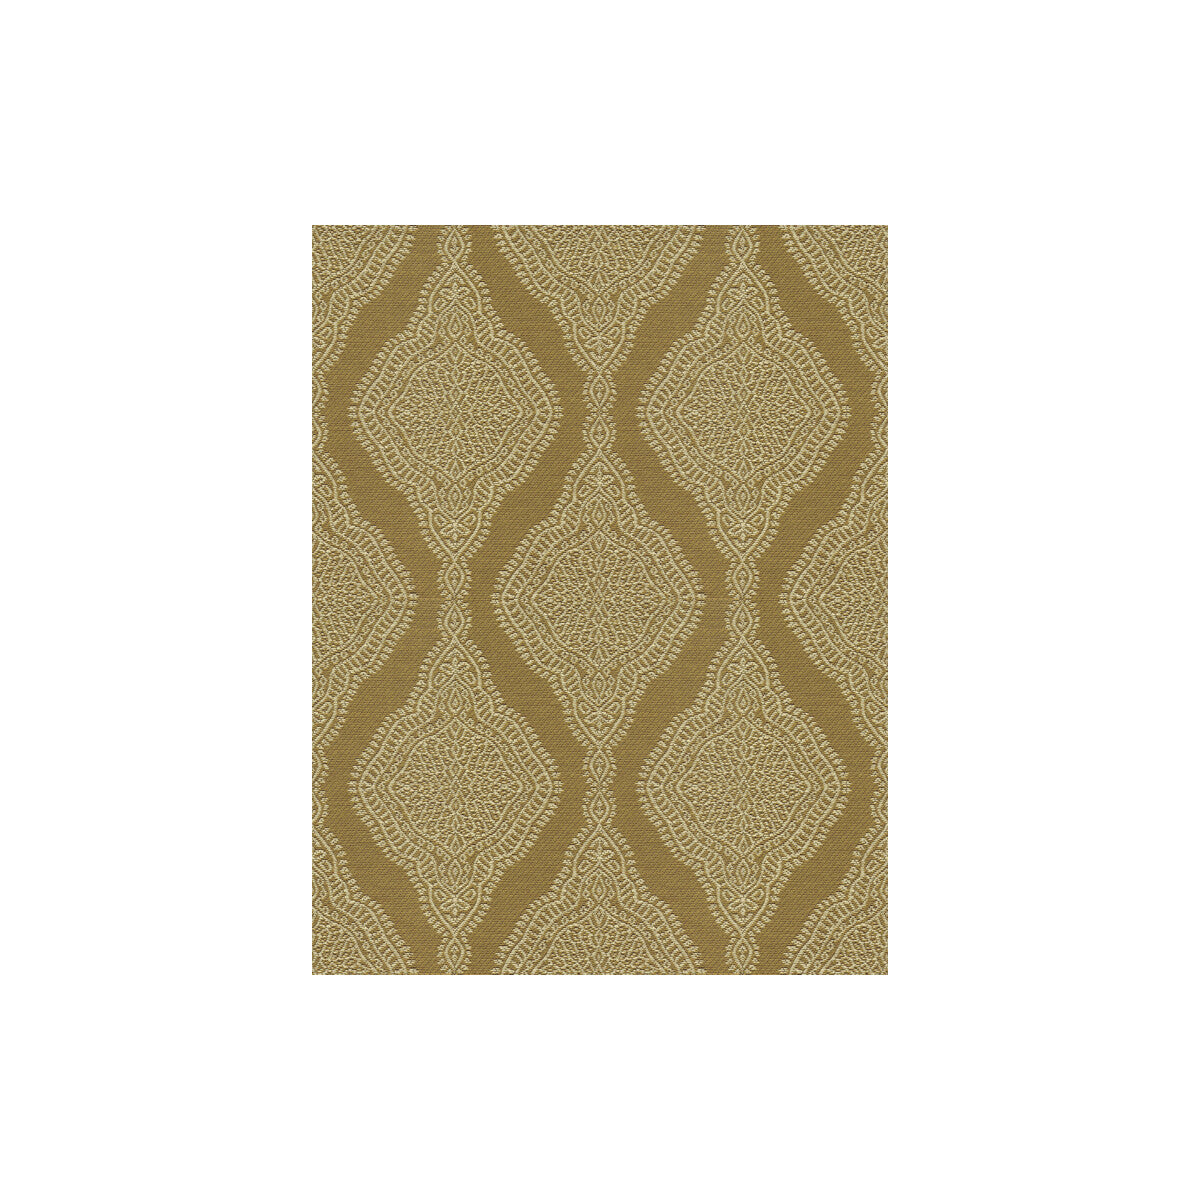 Liliana fabric in lemongrass color - pattern 32935.30.0 - by Kravet Contract in the Contract Gis collection